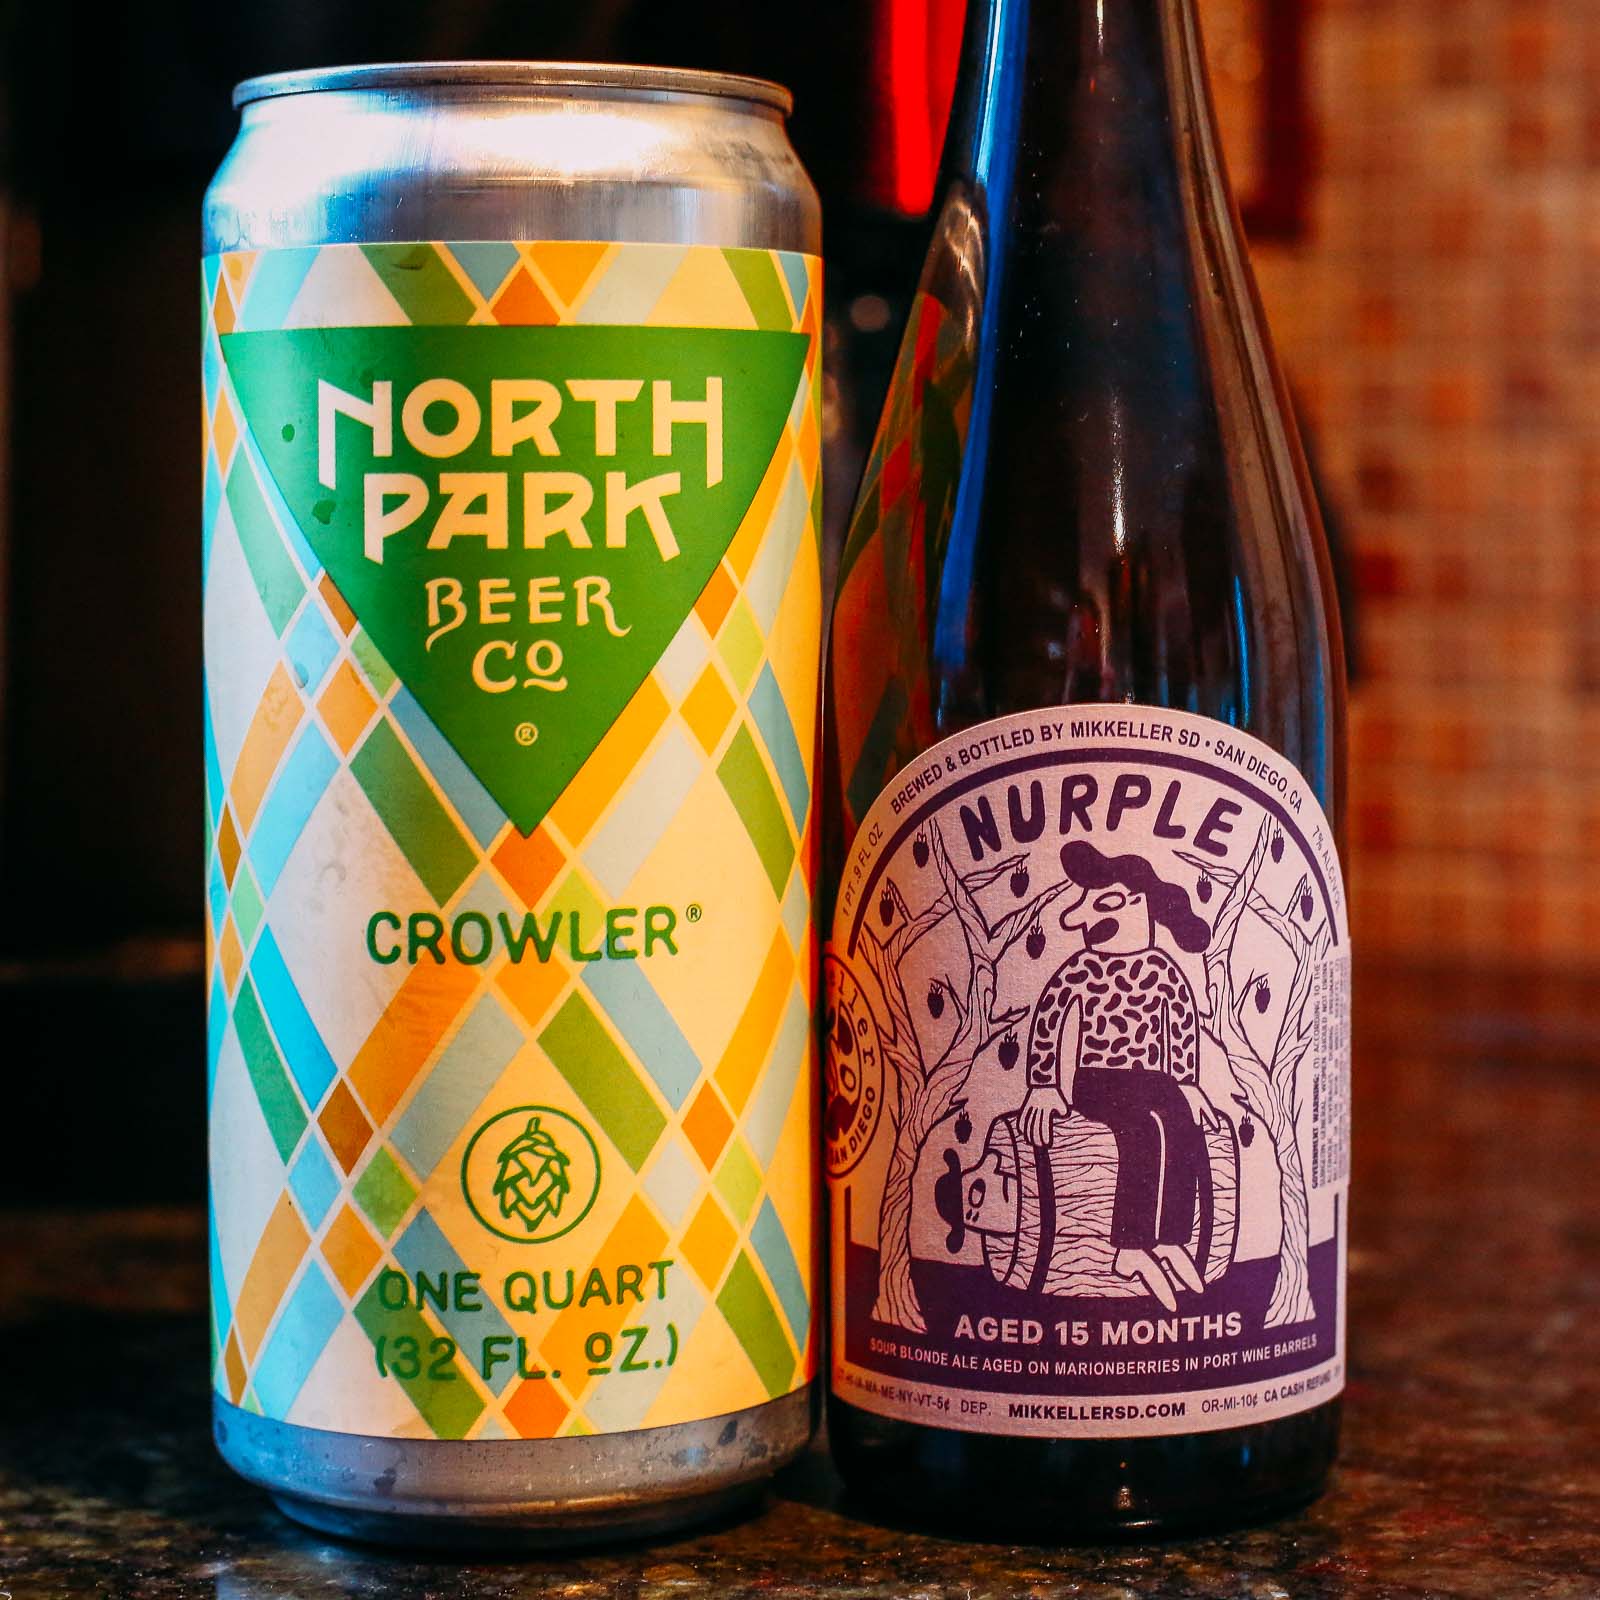 Beers from Mikkeller San Diego and North Park Beer Co